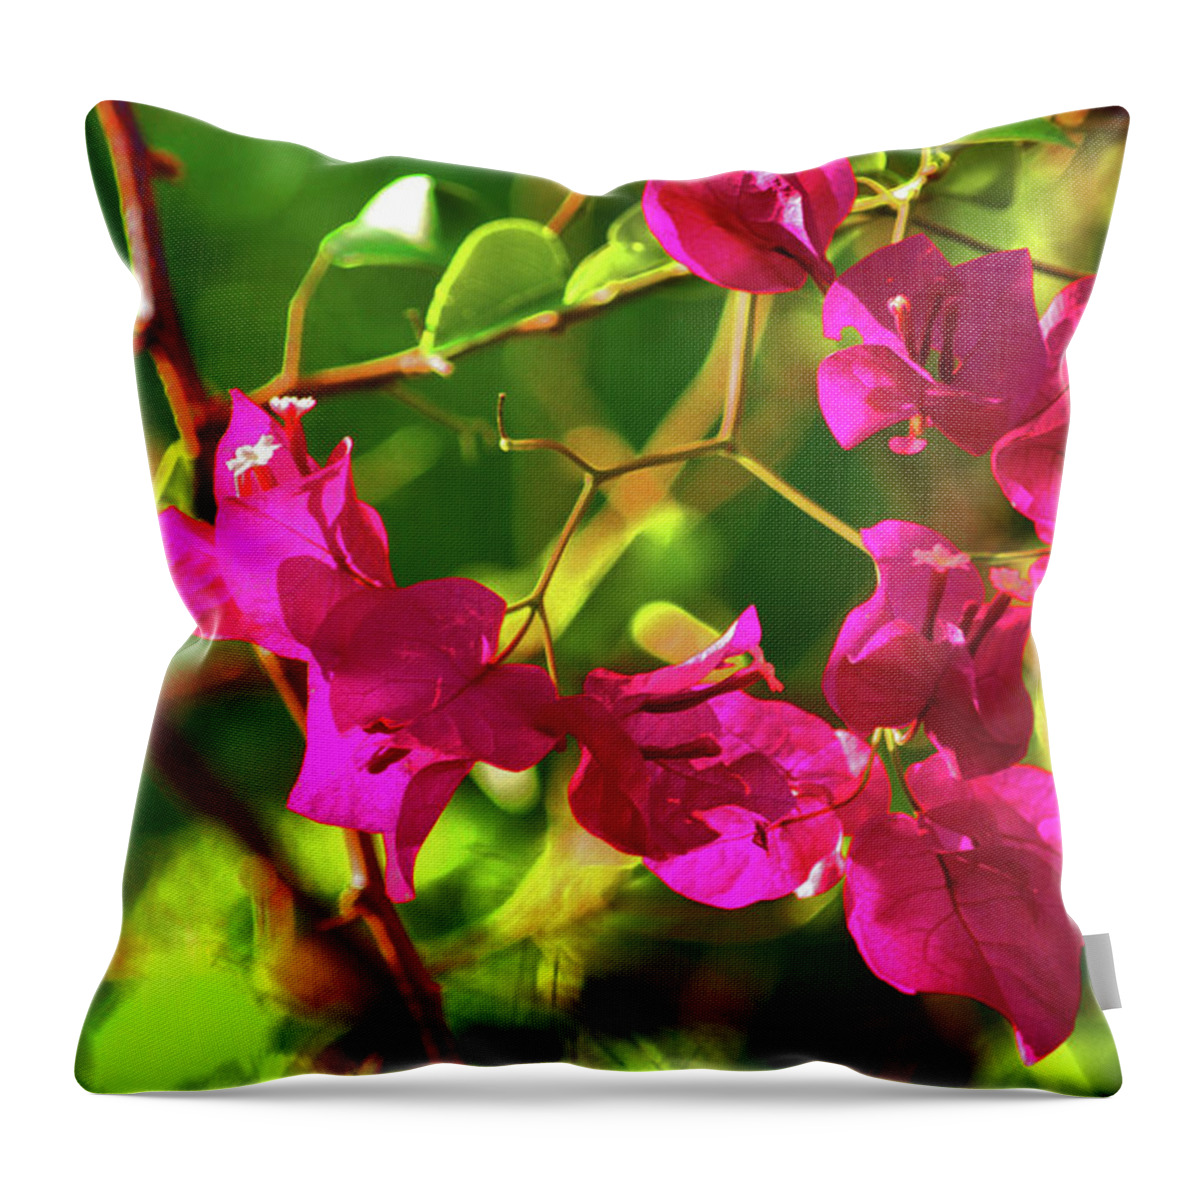 Bougainvillea Throw Pillow featuring the photograph 3- Bougainvillea by Joseph Keane